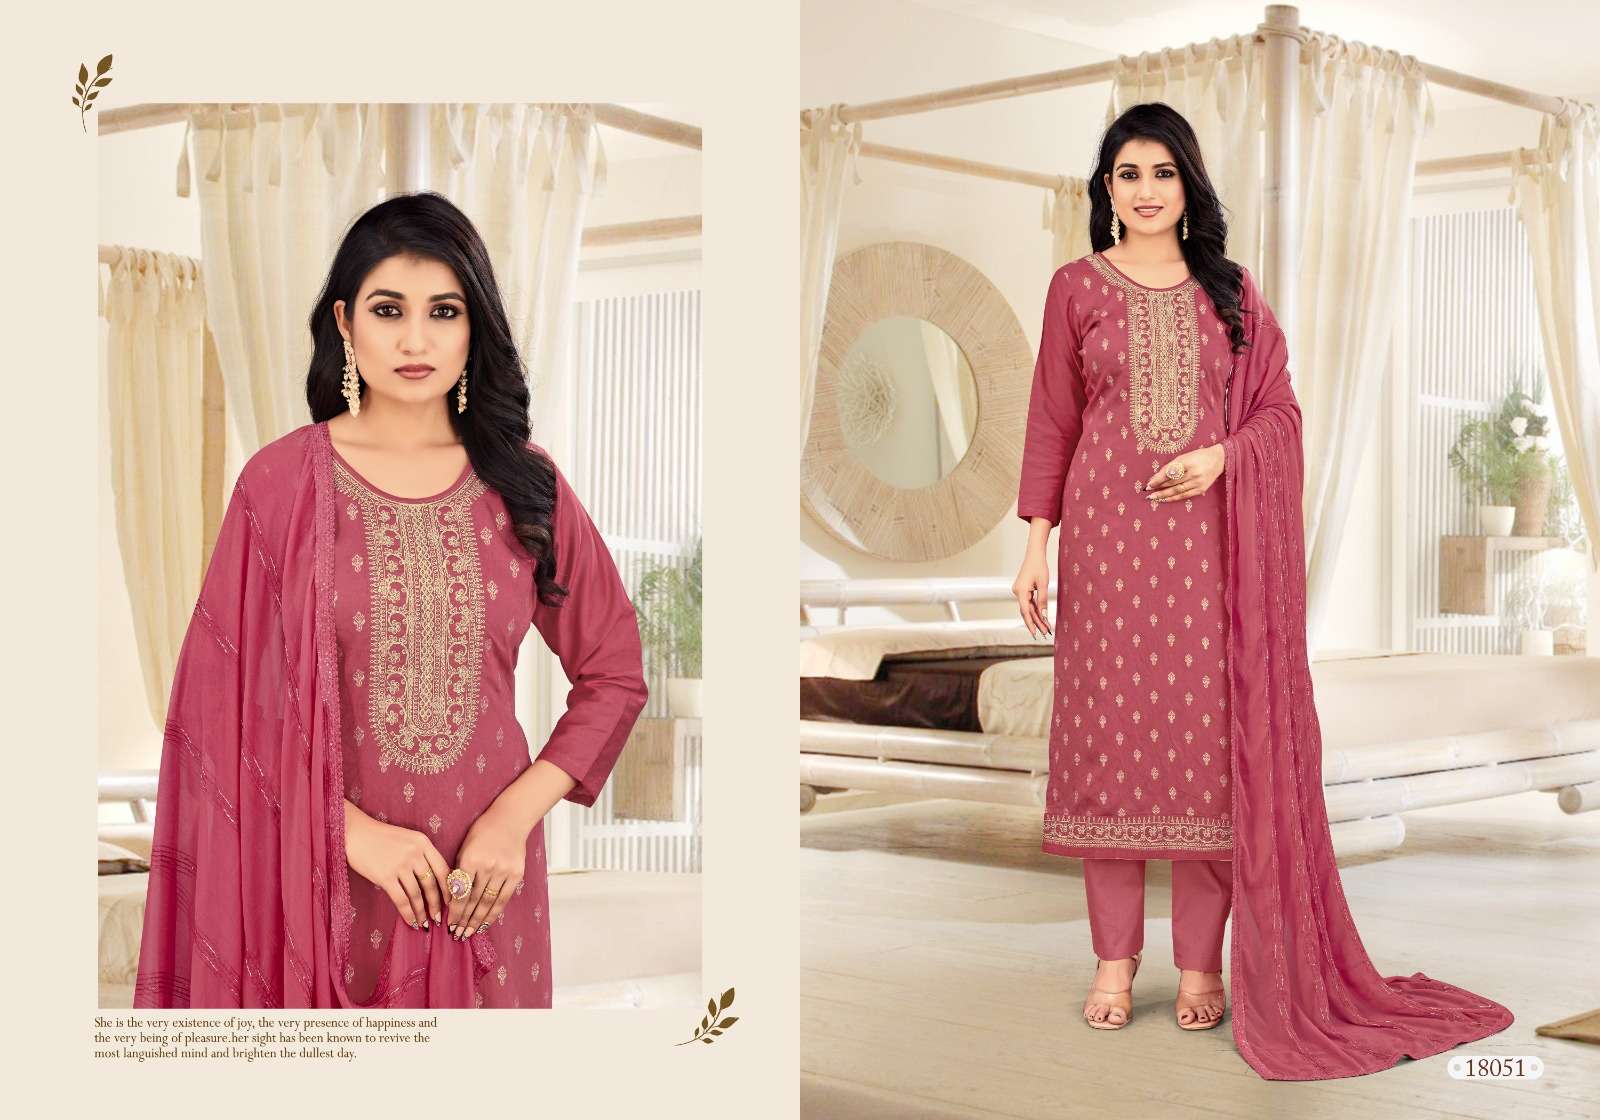 PANCH RATNA AKSHITA DESIGNER SELF JACQUARD WITH SEQUENCE WORK HEAVY SUITS WHOLESALE 